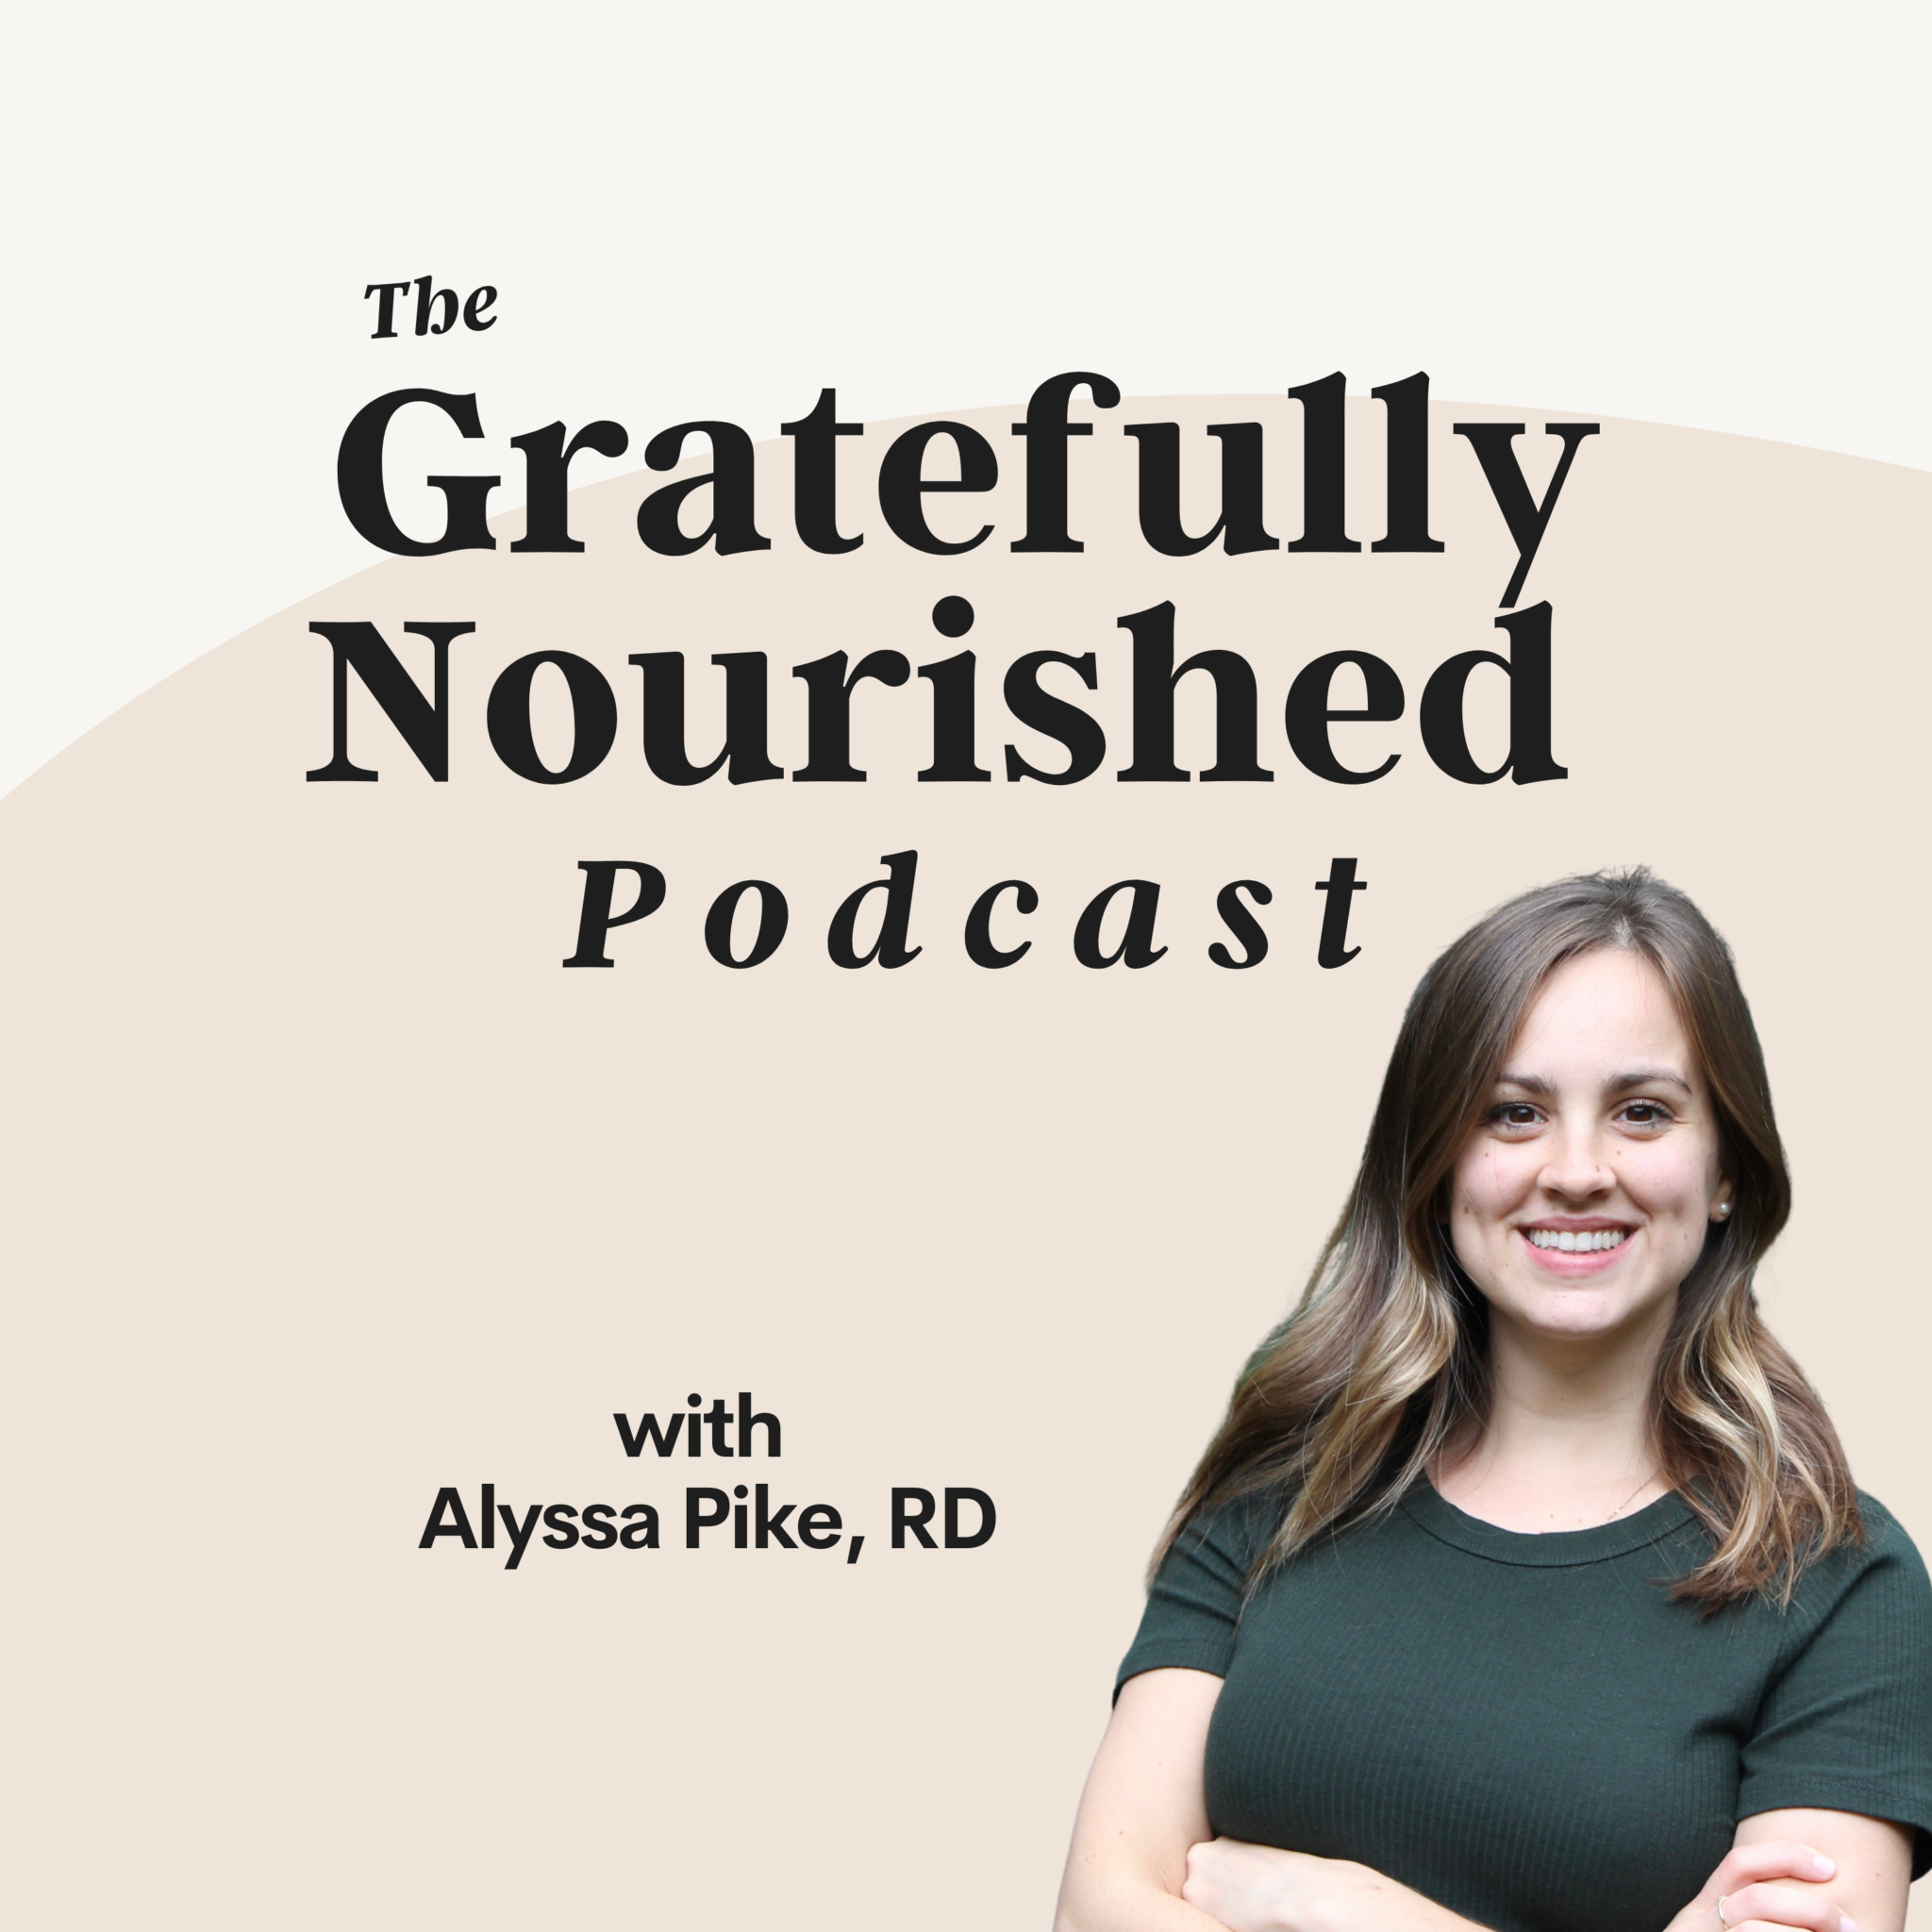 The Gratefully Nourished Podcast